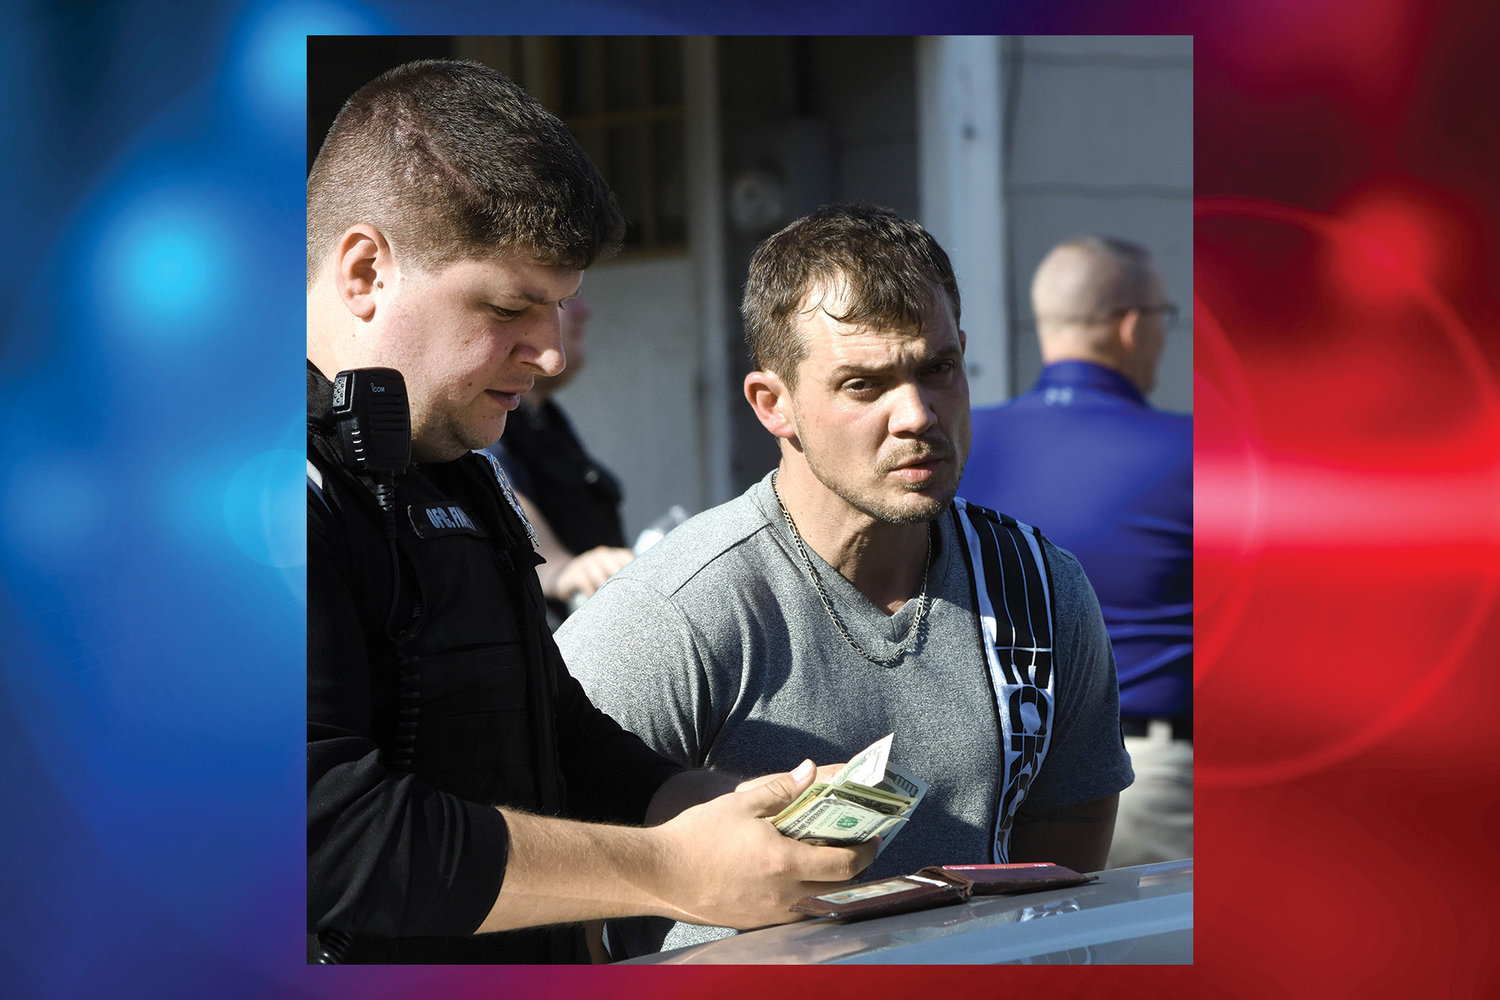 DANIEL N. HANKINS watches Jan. 11 as Owensville policeman Brenn Finley counts out the $935 in cash Hankins had on him after he surrendered at a residence on Marvin Avenue. Hankins was wanted on an absconder warrant from Probation and Parole.